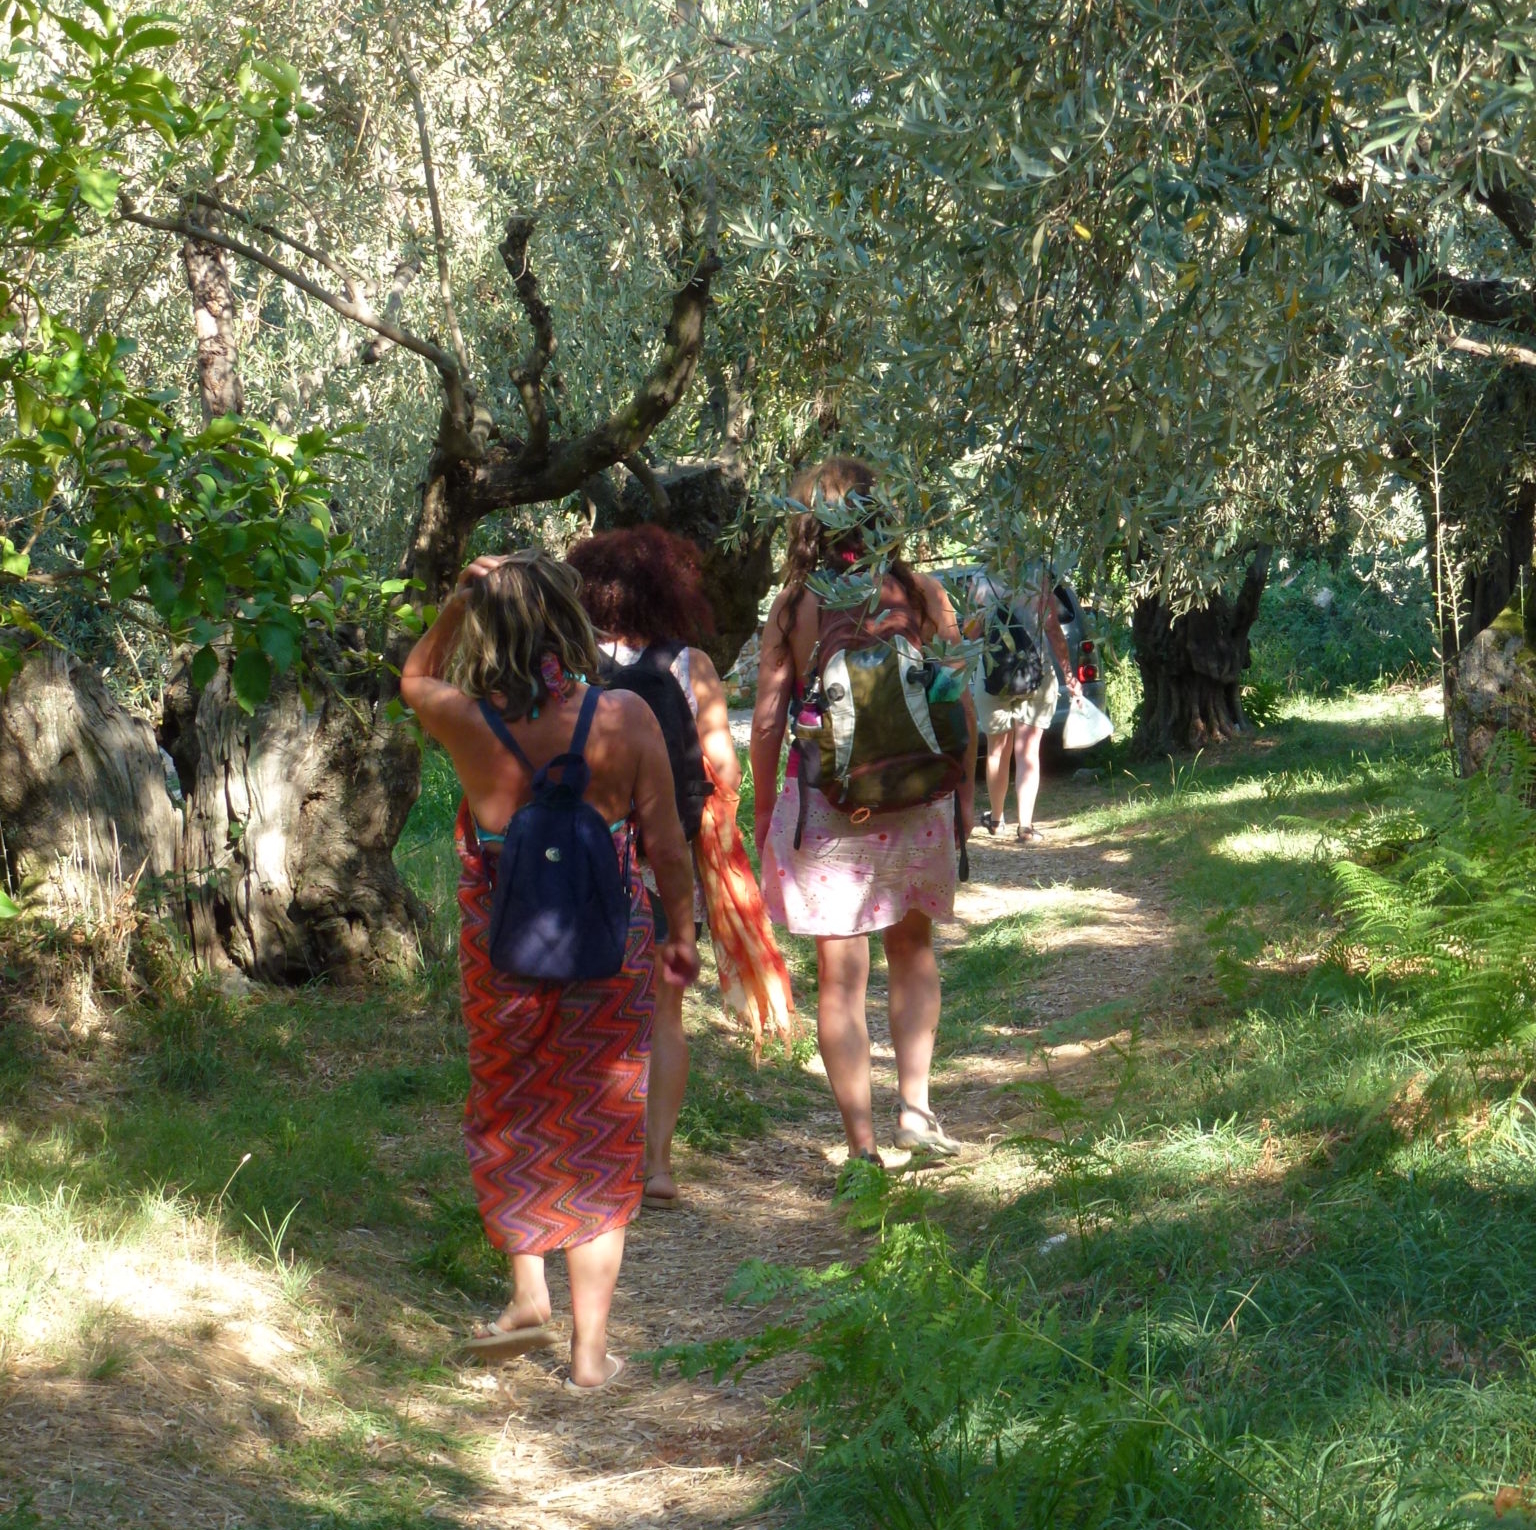 walking through ancient olive groves